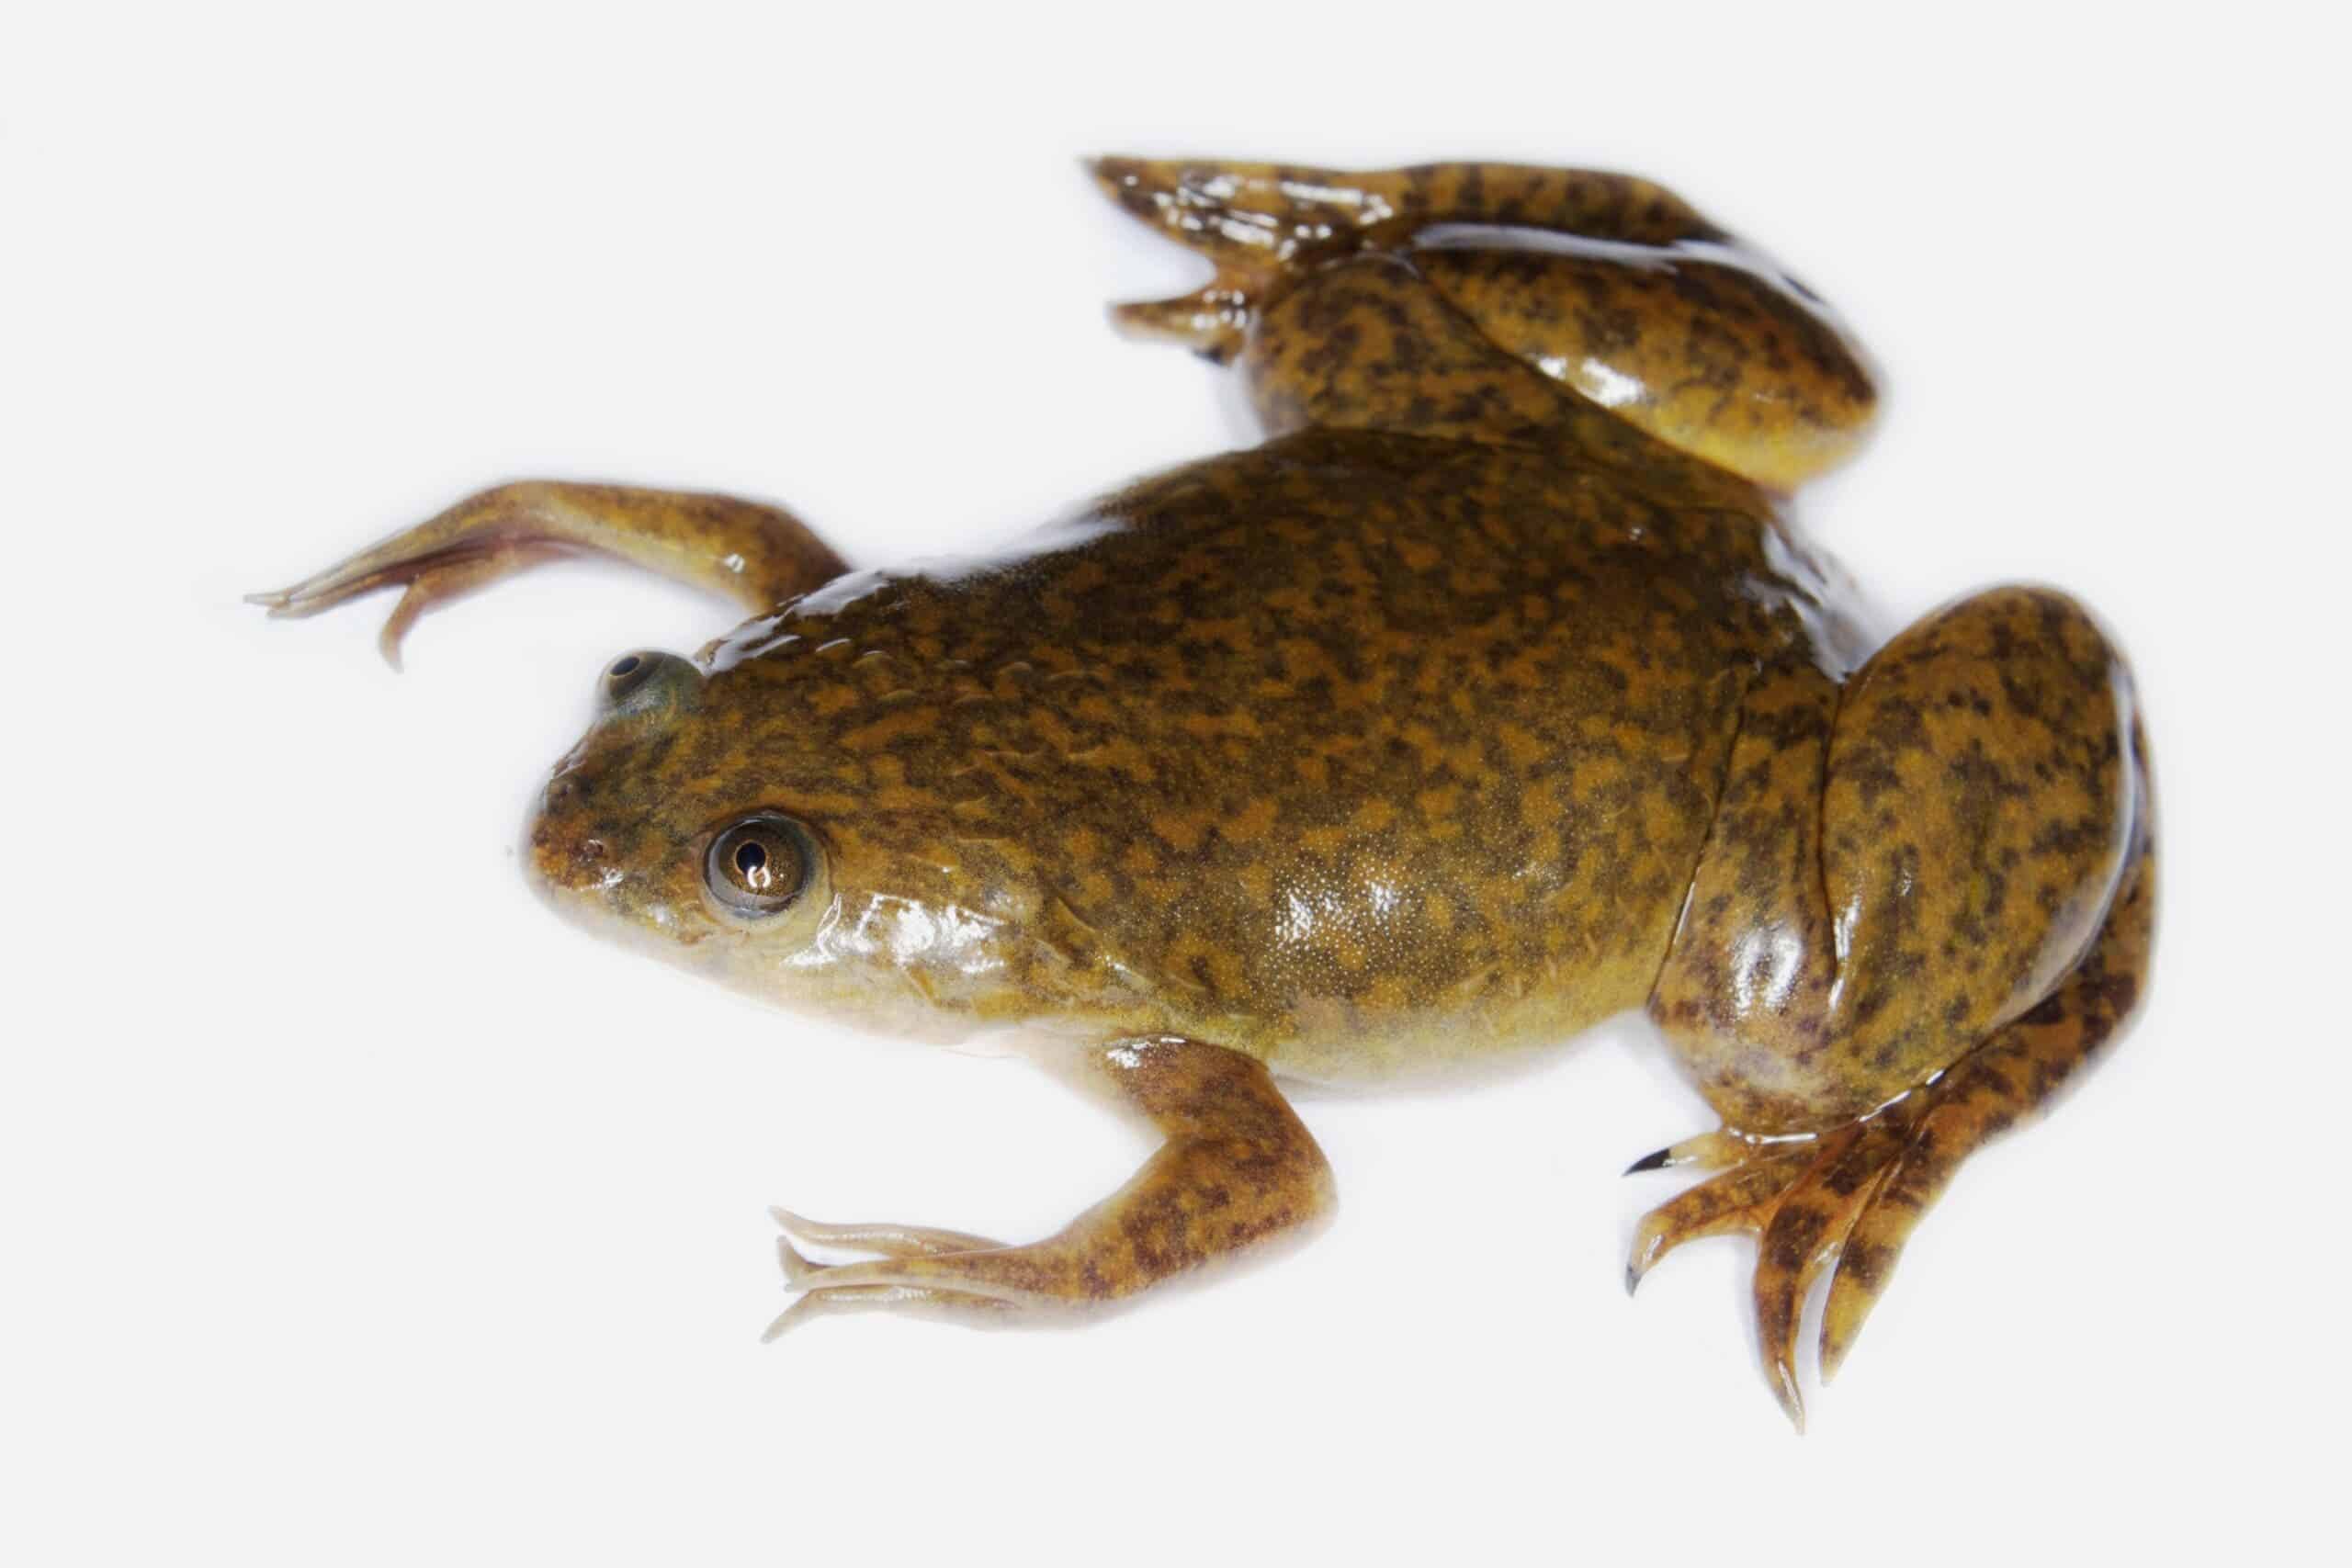 Researchers successfully regrow limbs on frogs. They want to do the same thing with humans